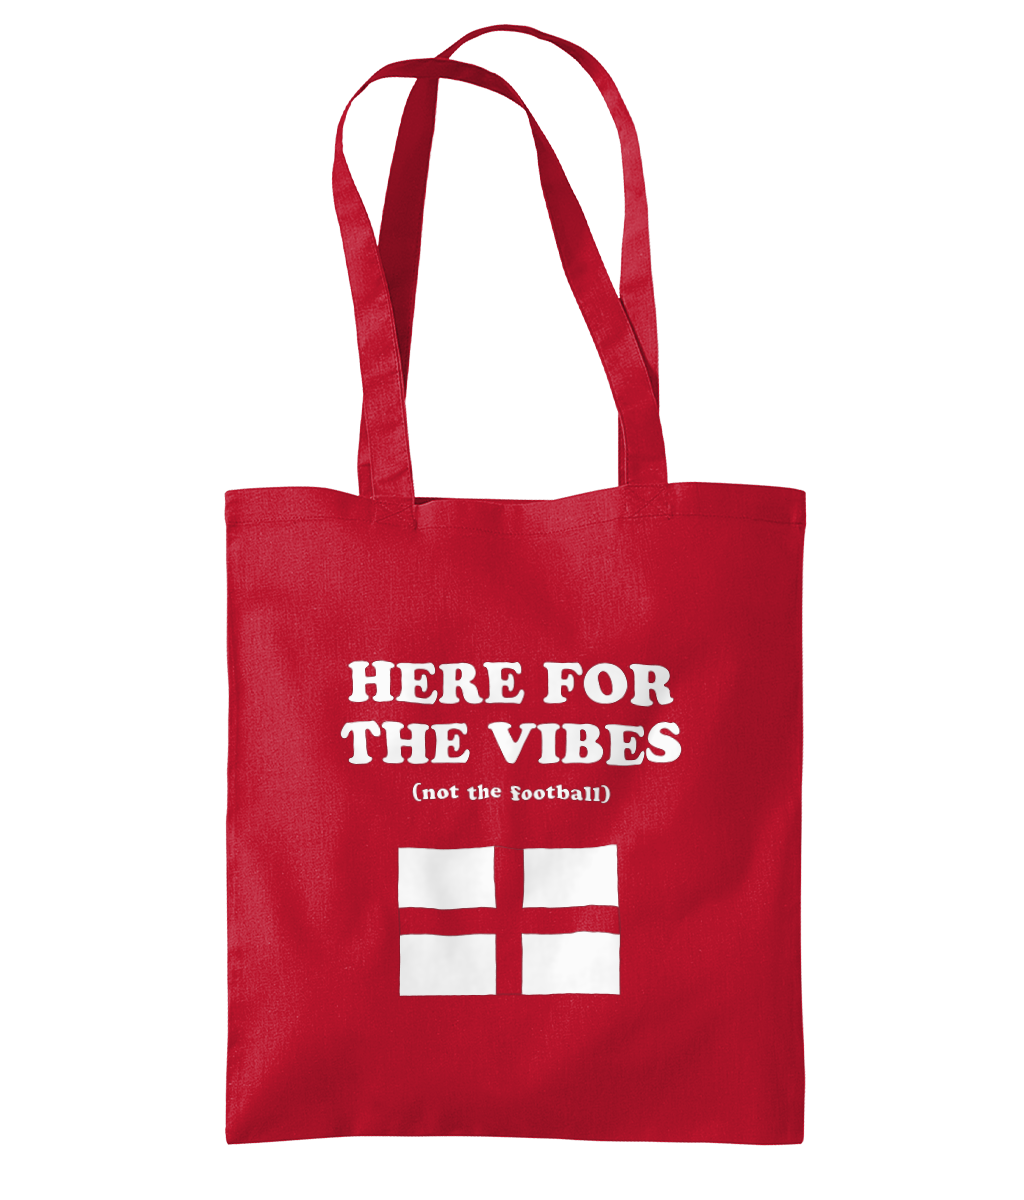 Here for the vibes tote - Red